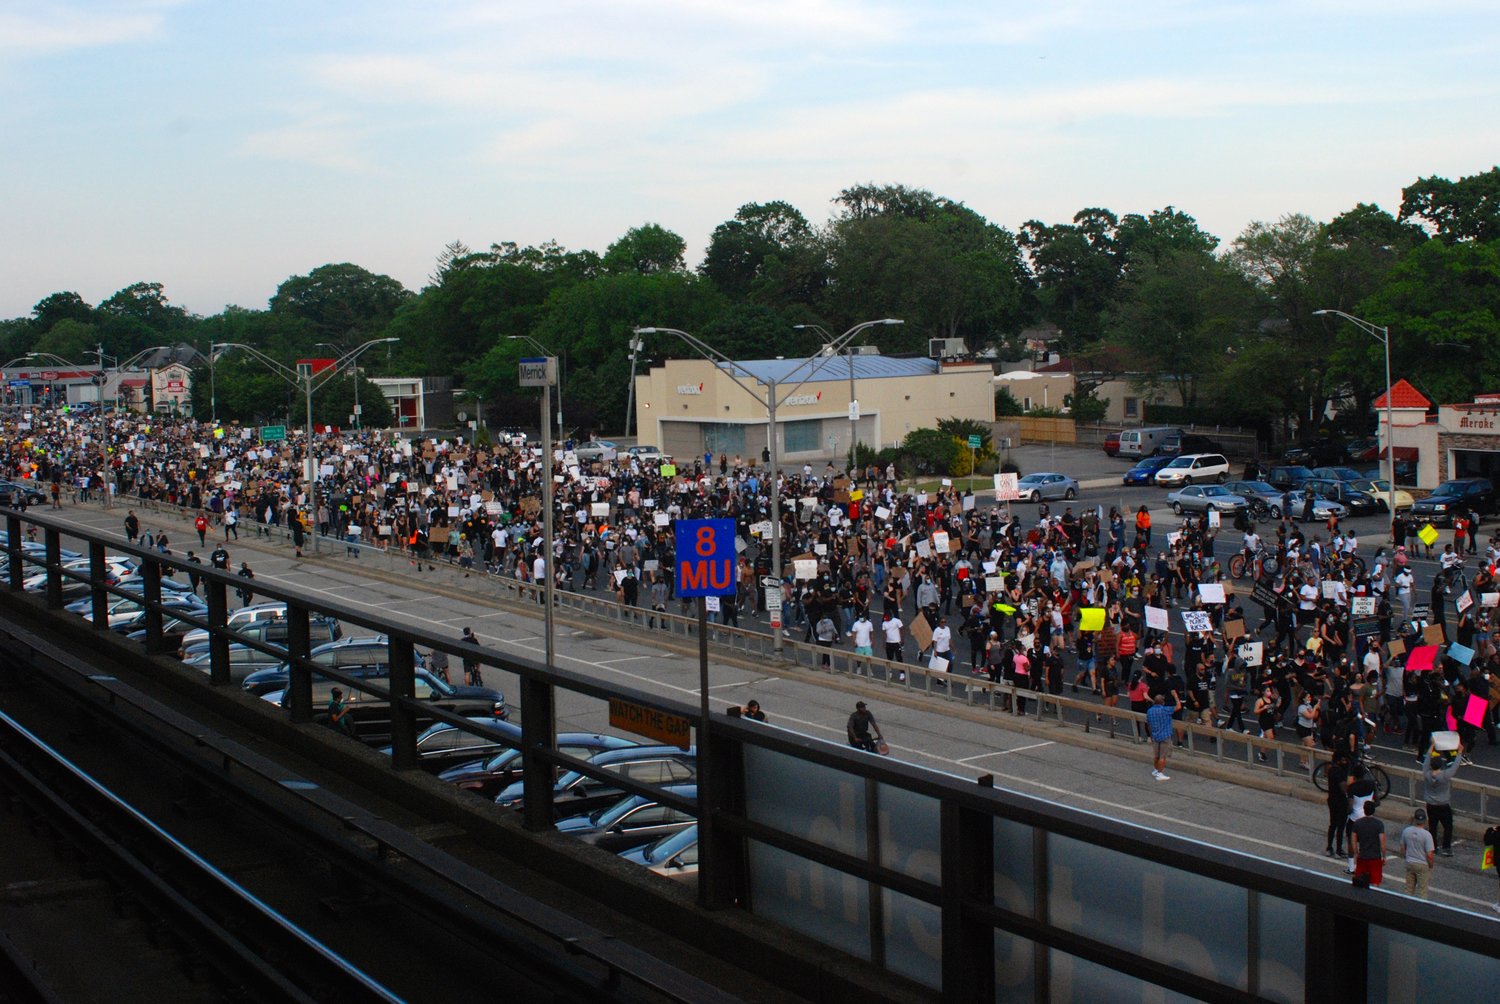 Nassau County police estimated the crowd at 4,000 people. Above, protesters on Sunrise Highway arriving at the Merrick Long Island Rail Road station.